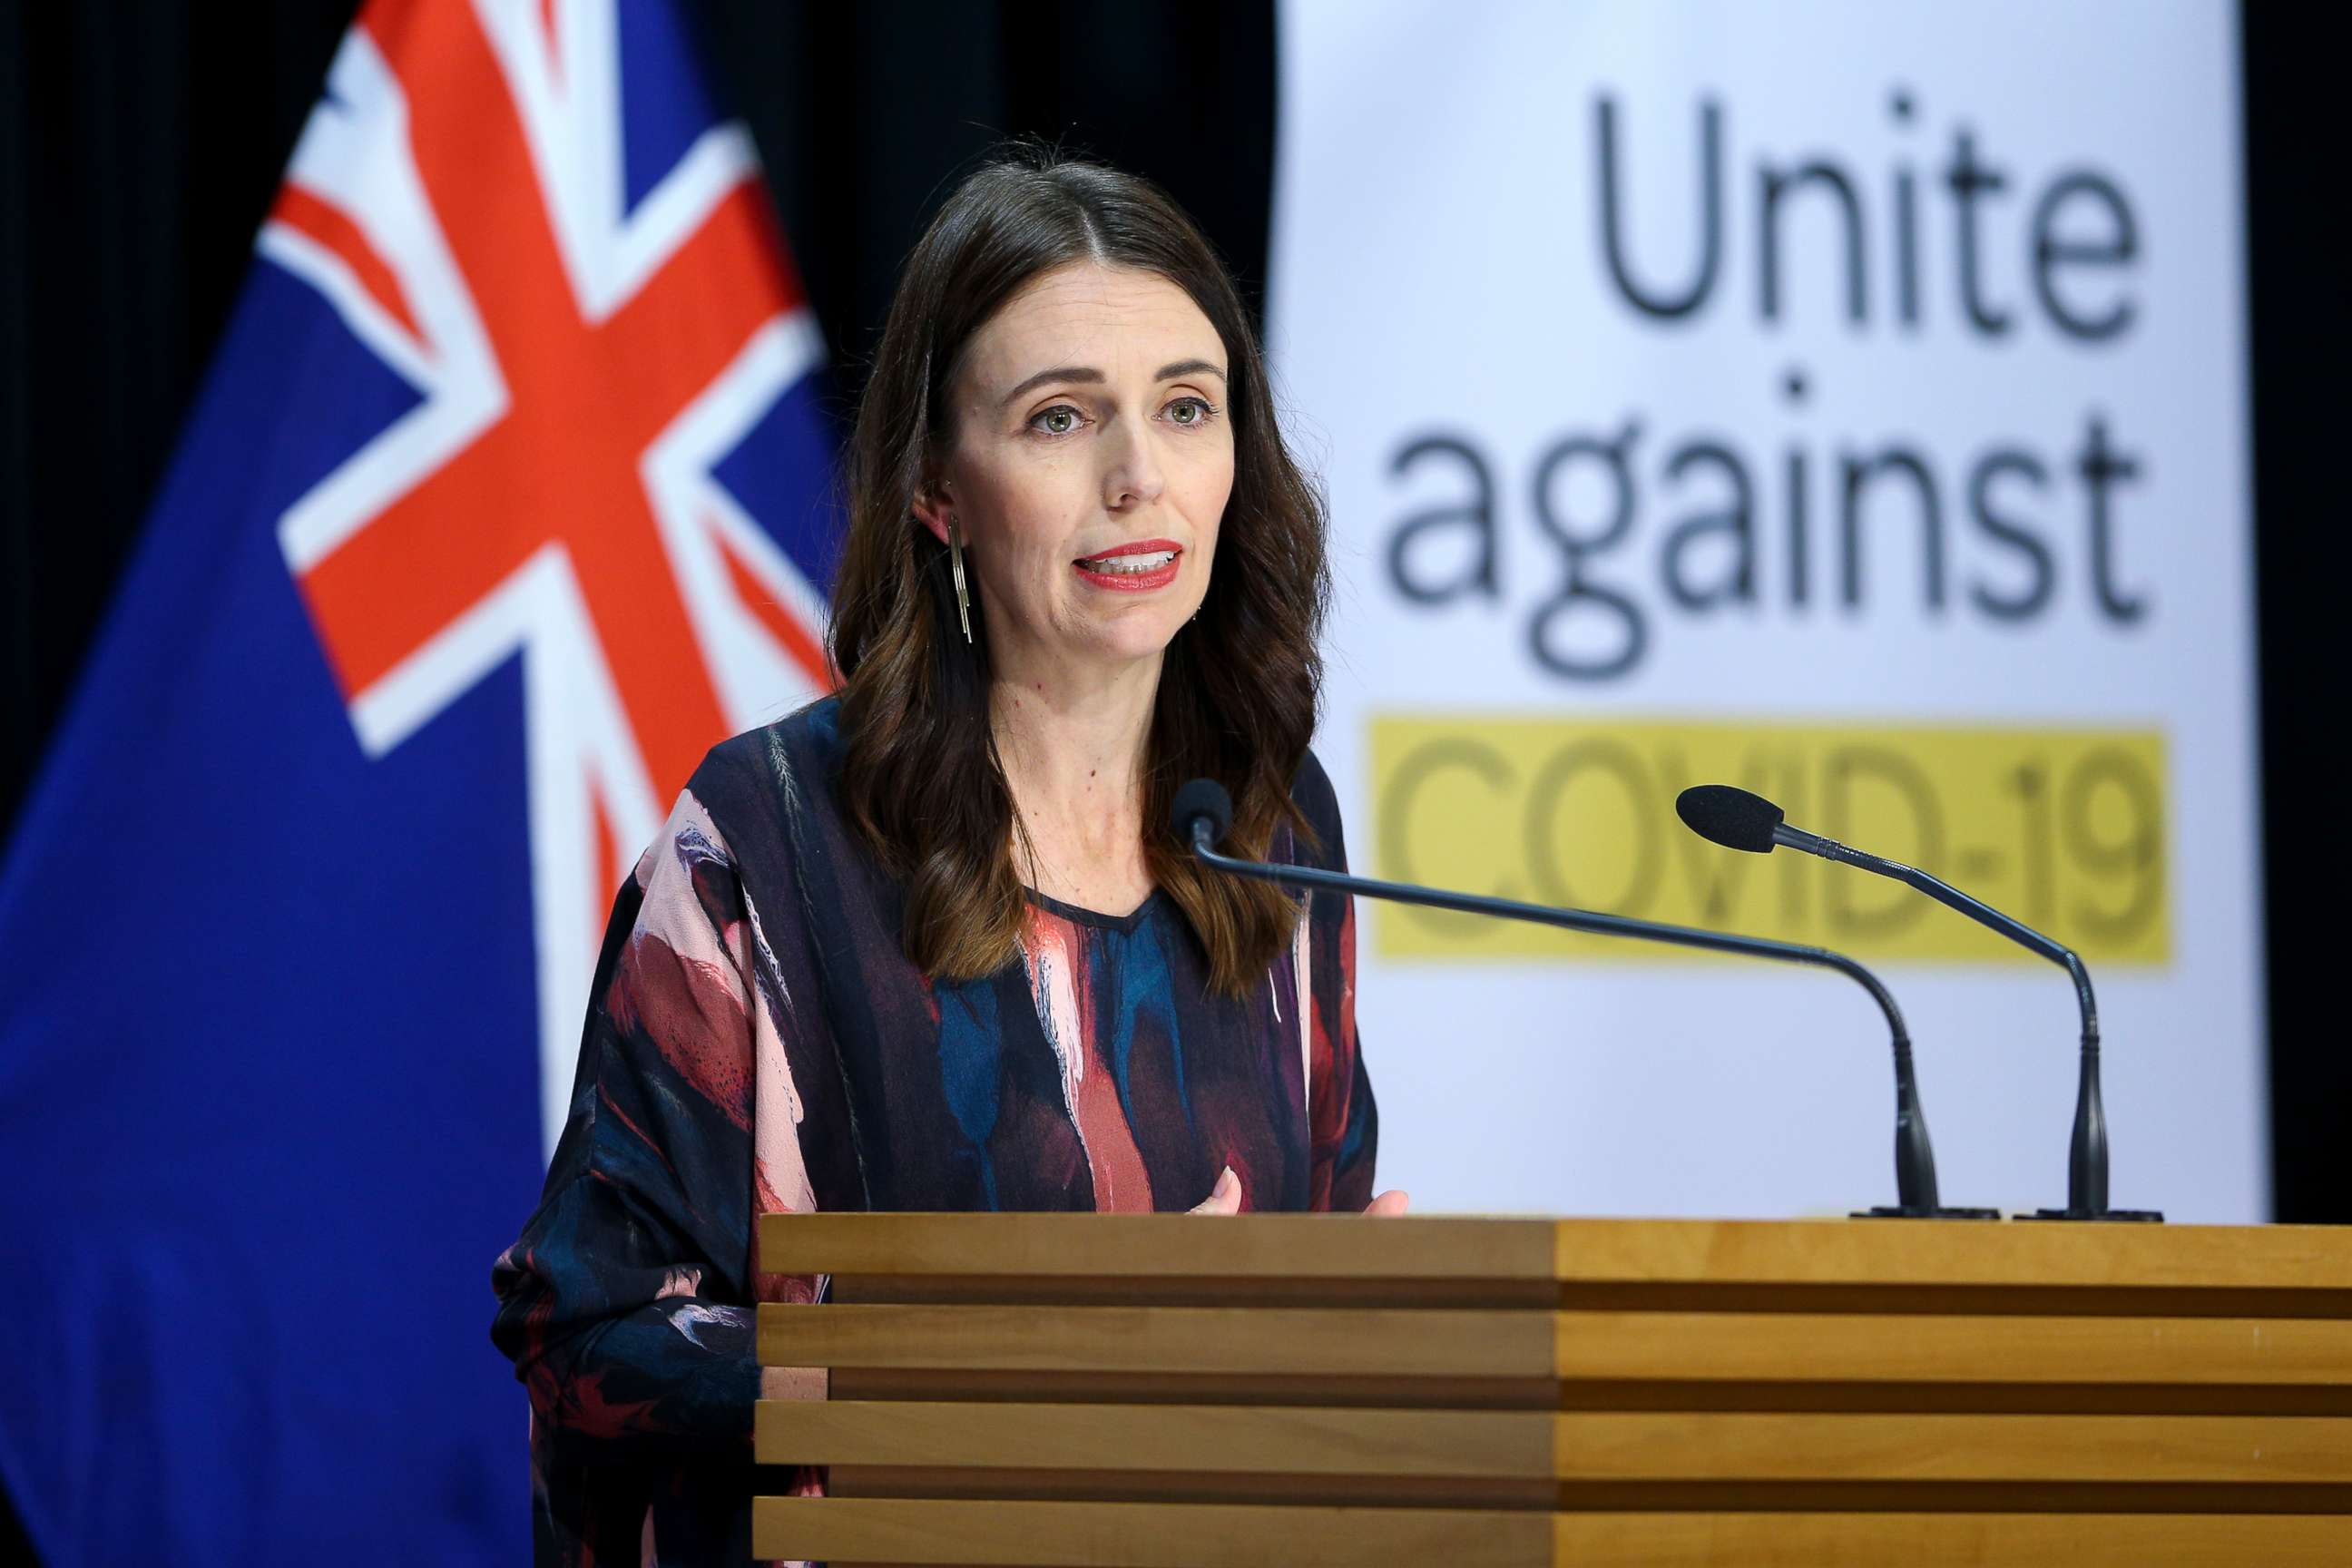 PHOTO: Prime Minister Jacinda Ardern speaks to media during a press conference at Parliament on May 12, 2020 in Wellington, New Zealand.